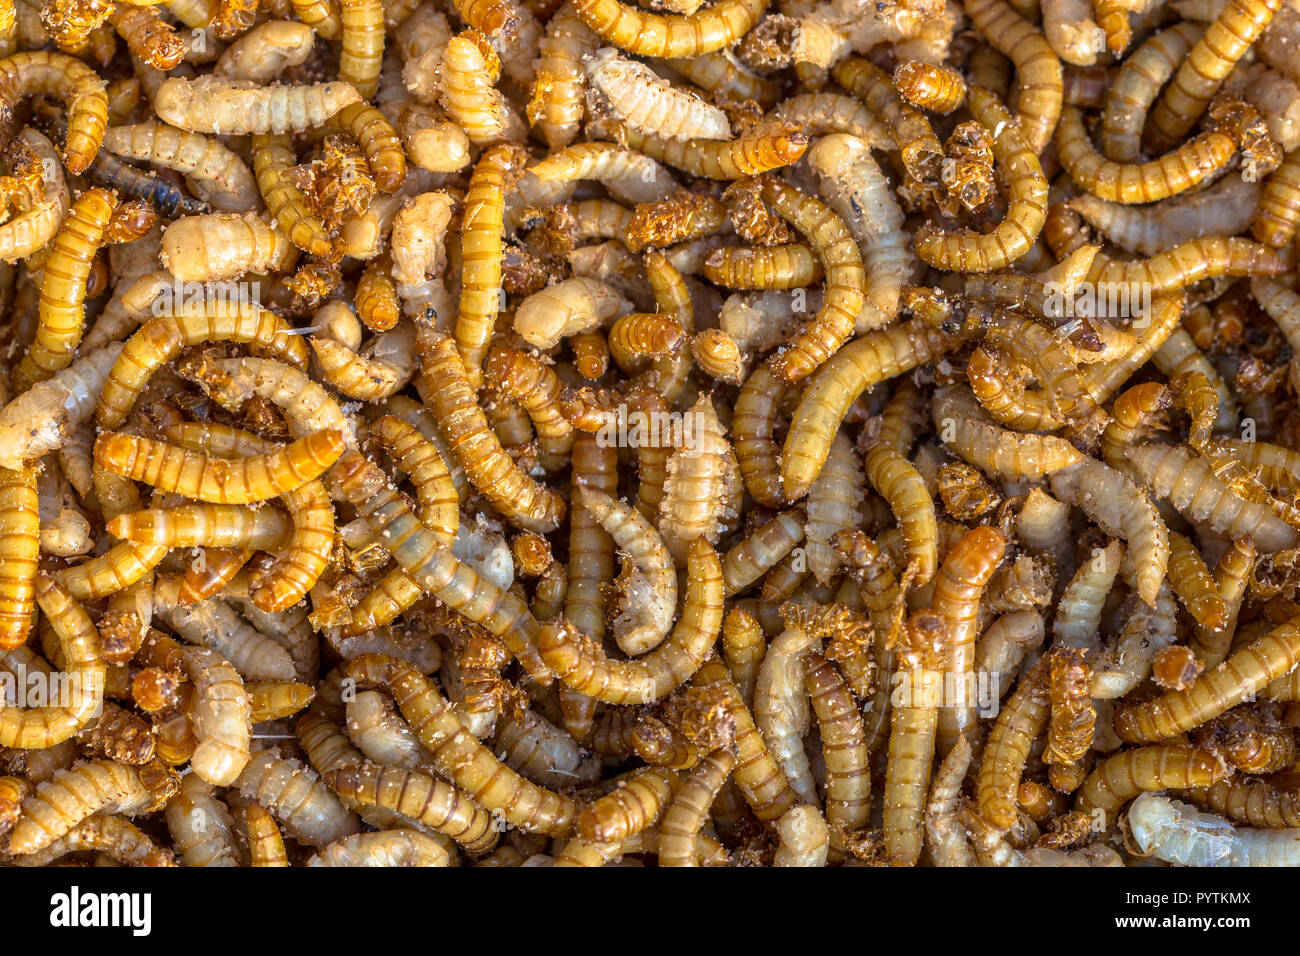 Living mealworm larvae background suitable as food Stock Photo